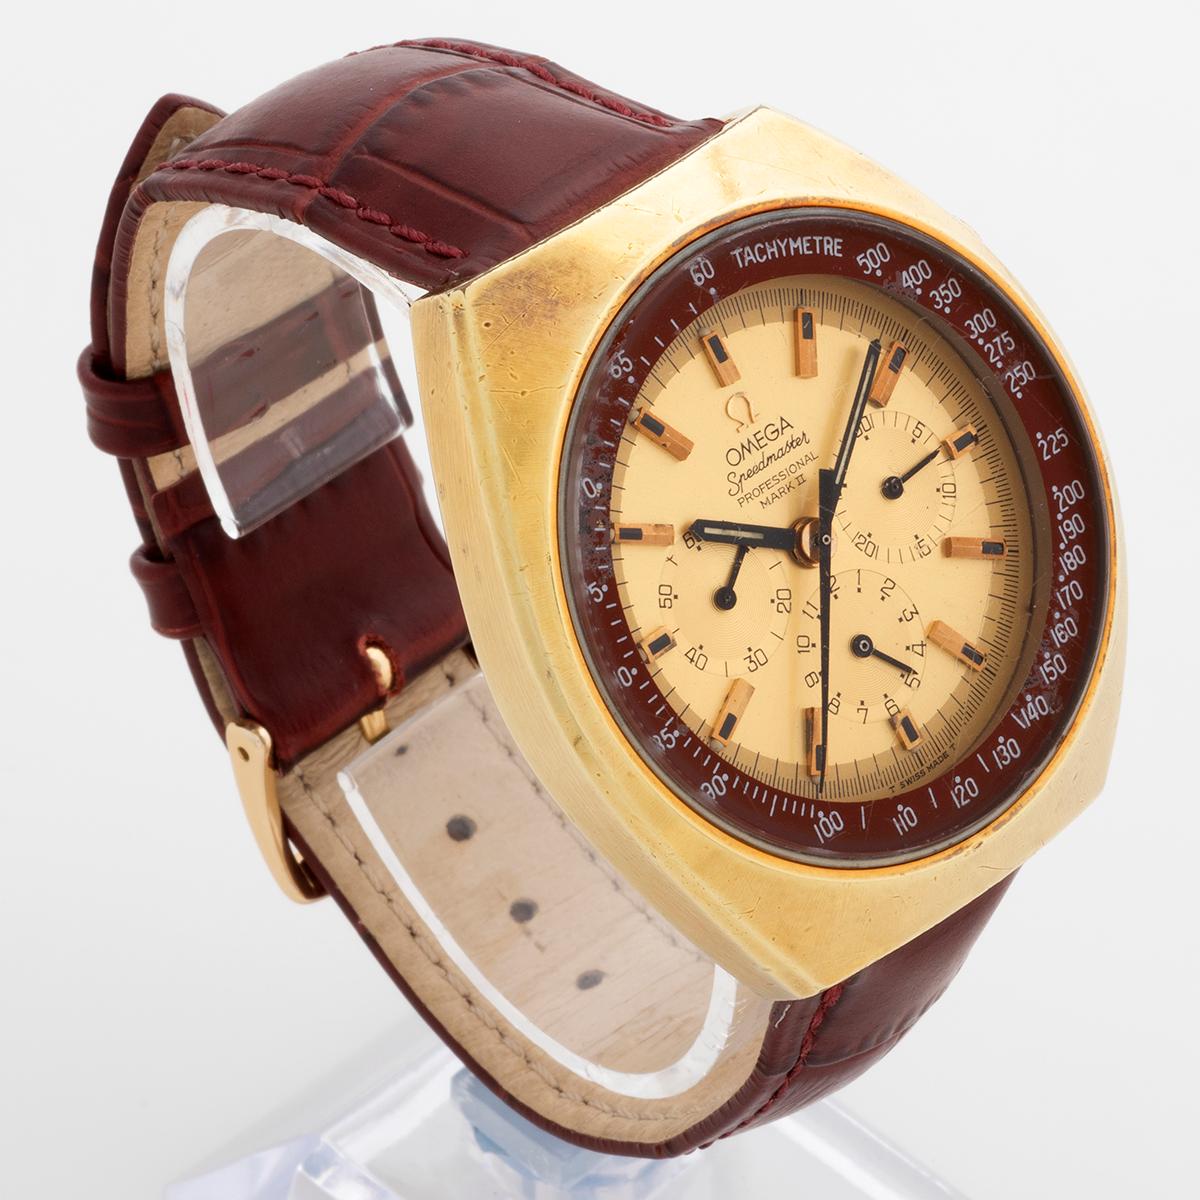 Our vintage and very rare Omega Speedmaster Mark II with cal. 861 movement features a 41.7mm heavy gold plated case with stainless steel case back, gold coloured dial and deep red/ brown tachy scale. This example is highly original with signs of use